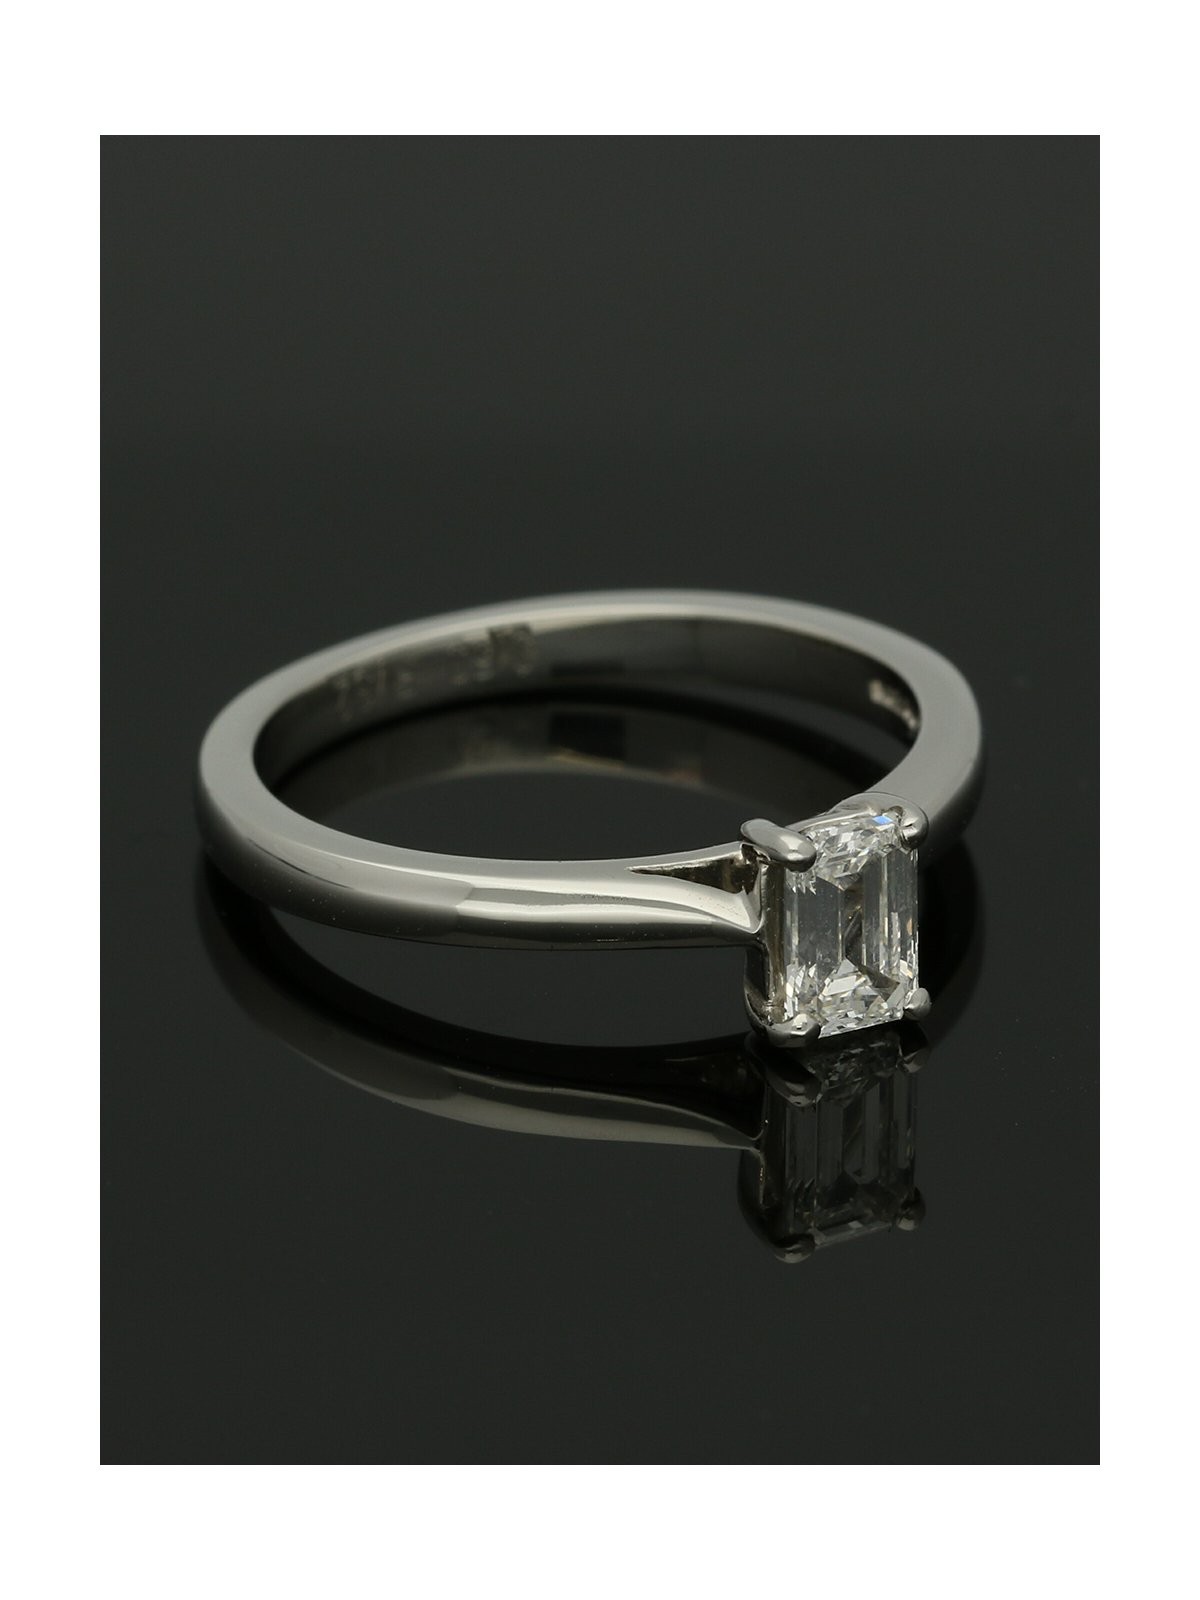 Diamond Solitaire Engagement Ring "The Zara Collection" Certificated 0.50ct Emerald Cut in Platinum